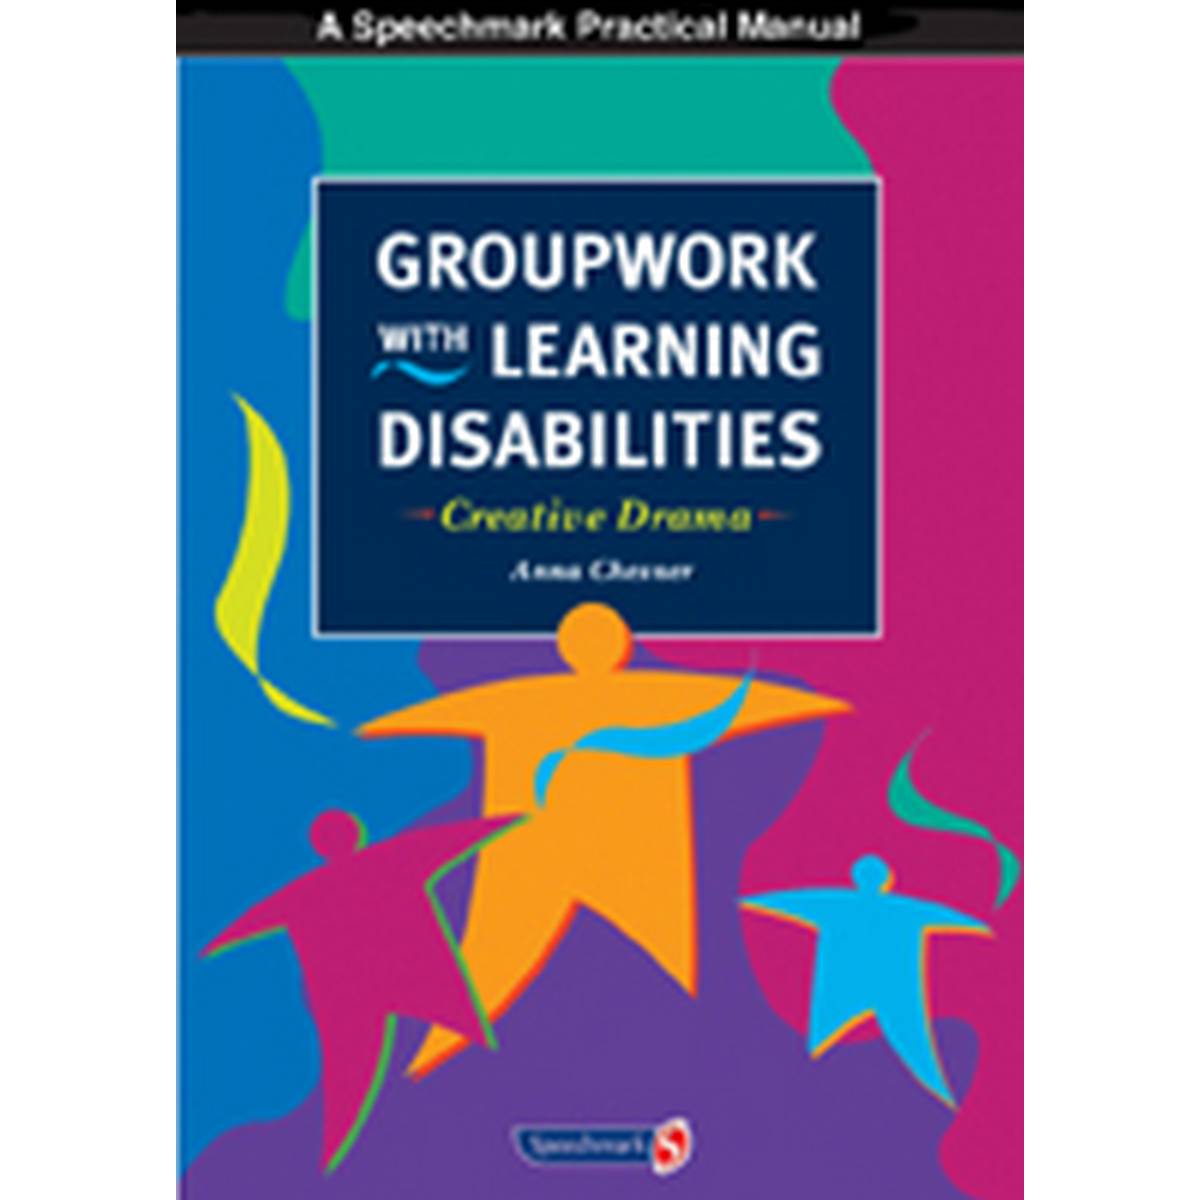 Groupwork with Learning Disabilities -  Creative Drama